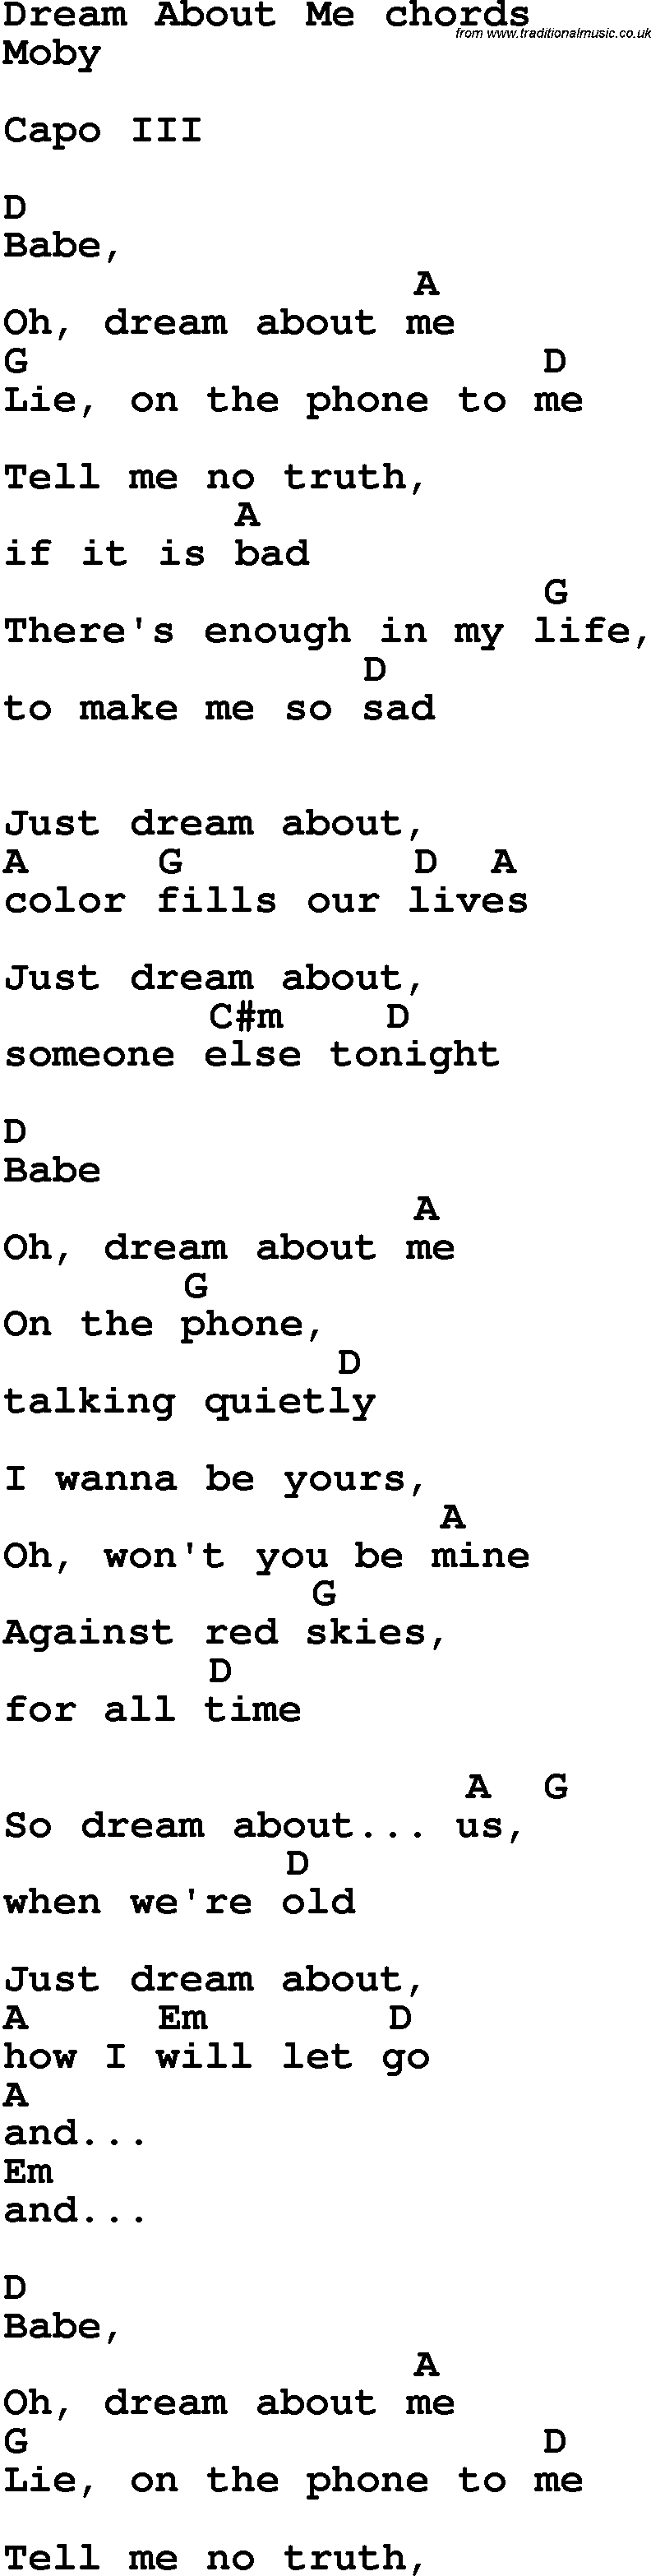 Song Lyrics with guitar chords for Dream About Me